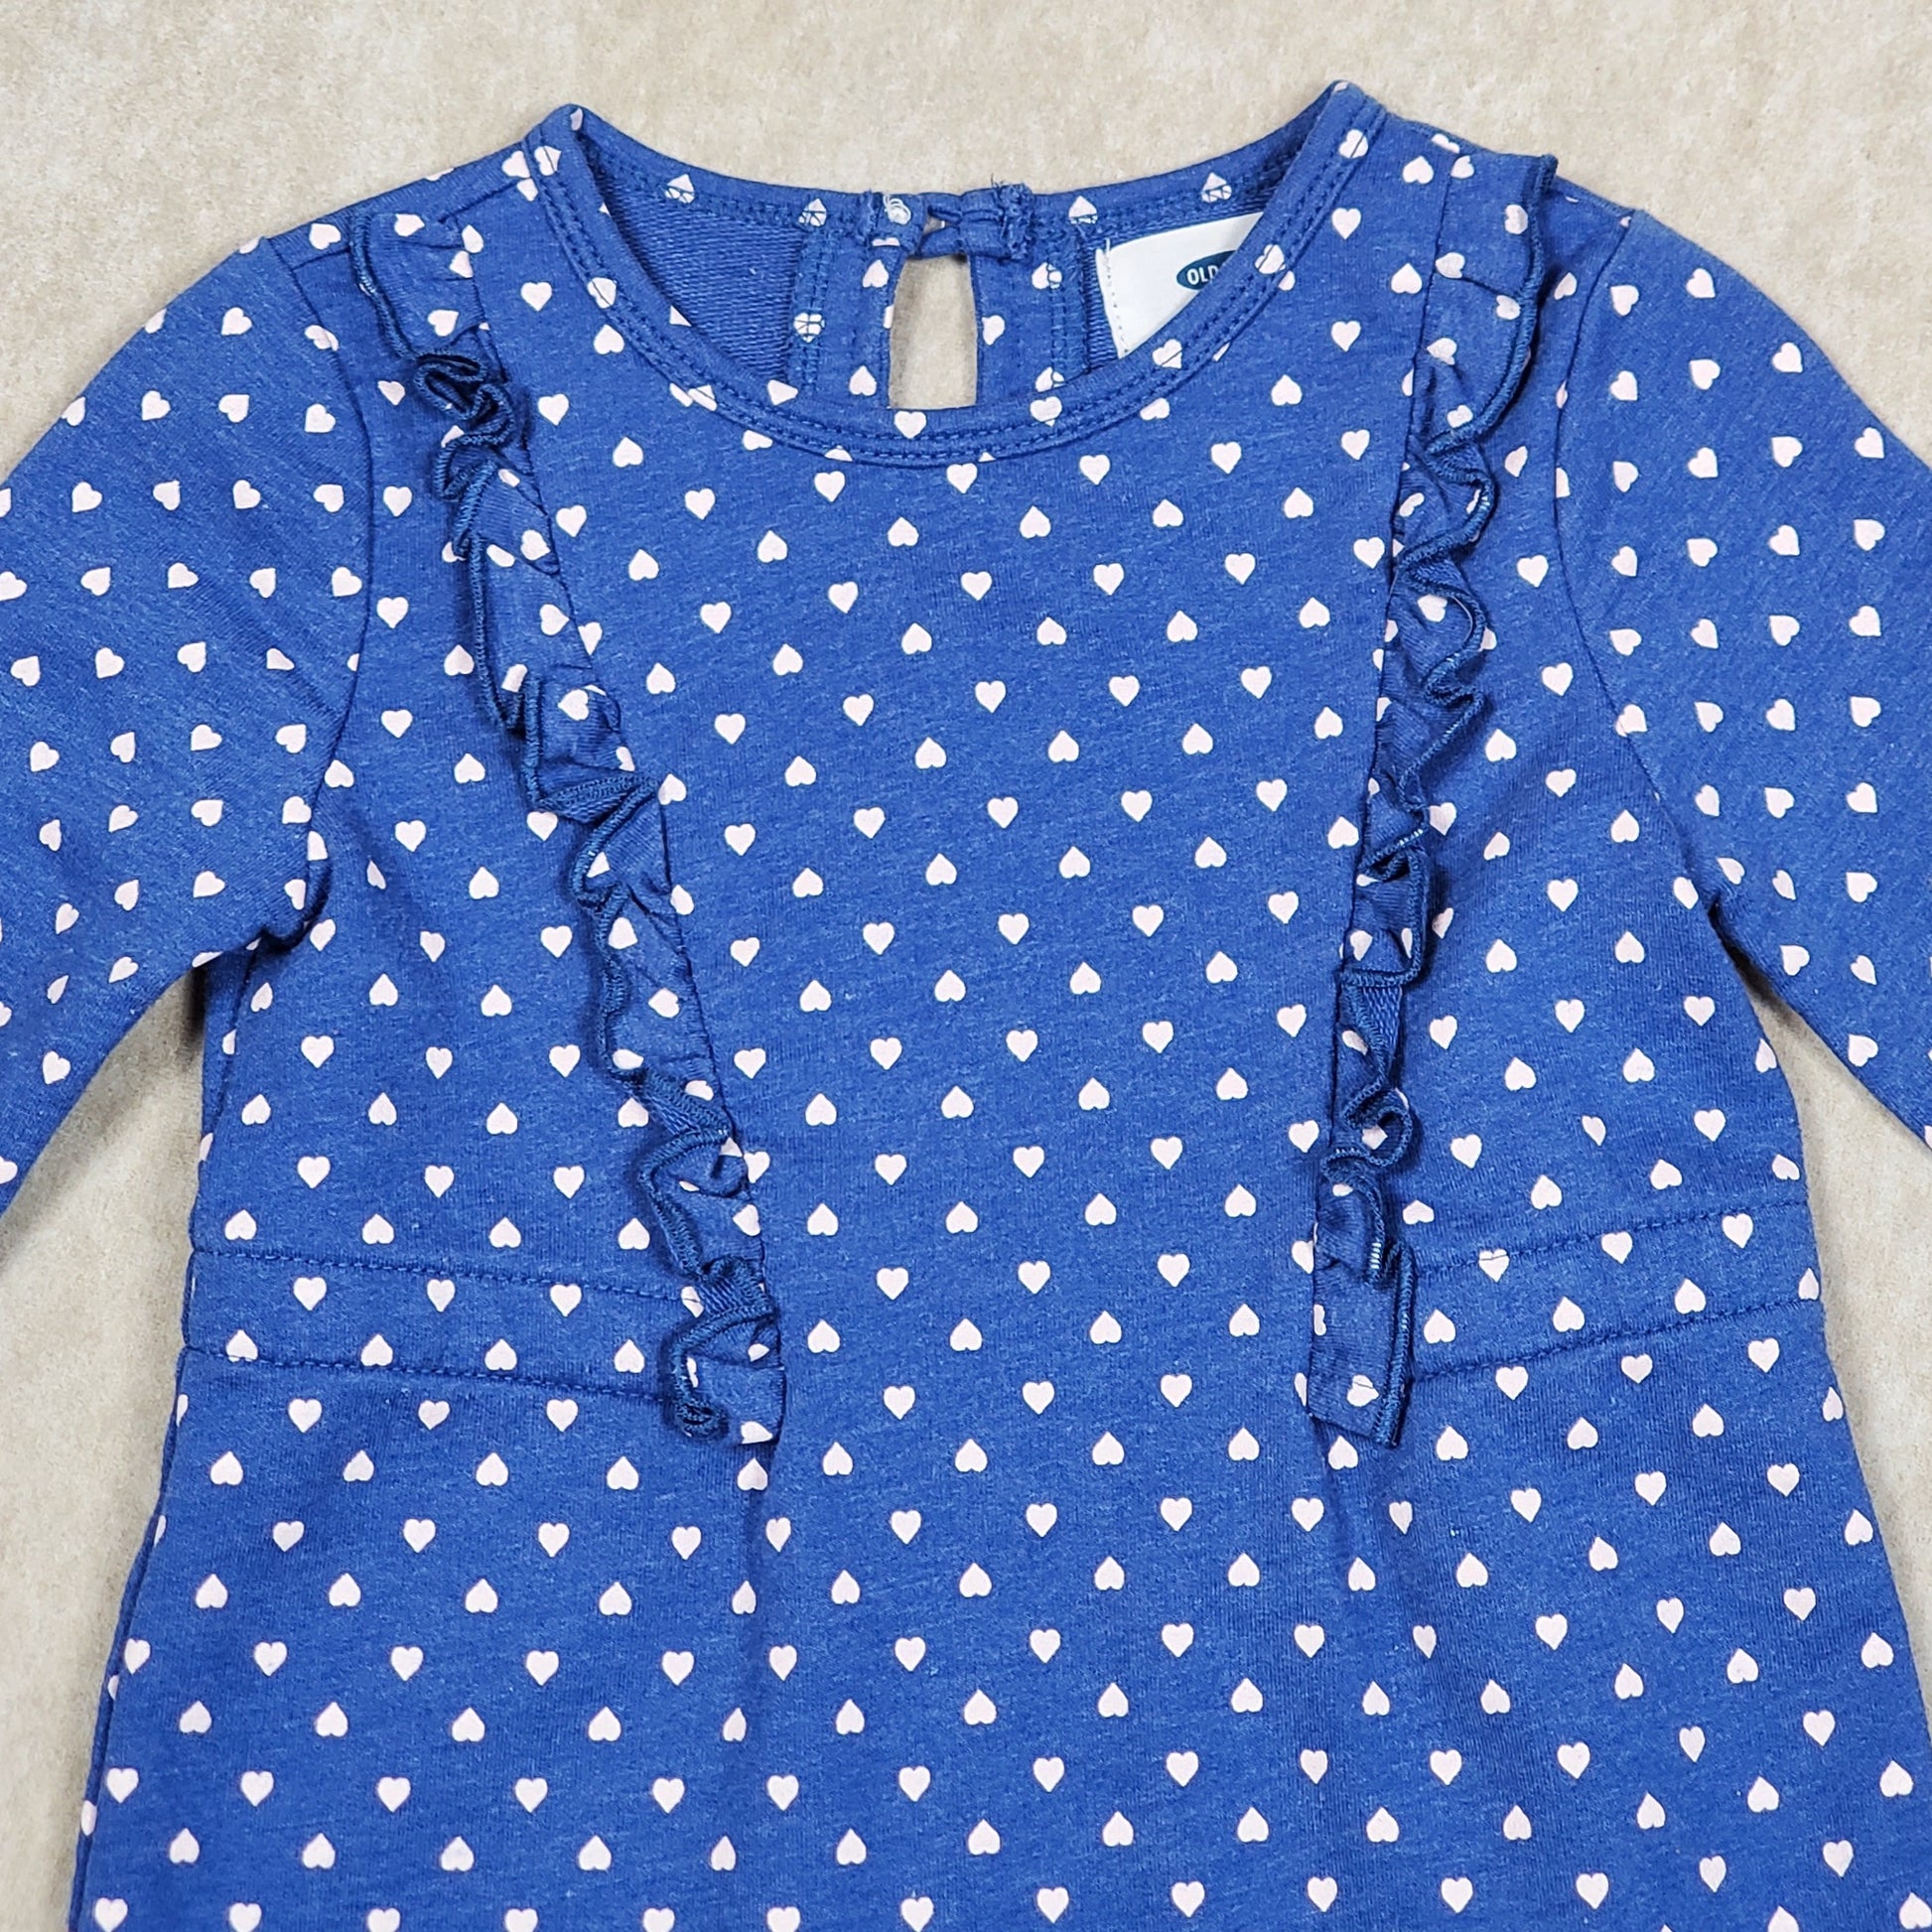 Old Navy Girls Blue Heart Sweater Dress 18M Used, front close-up